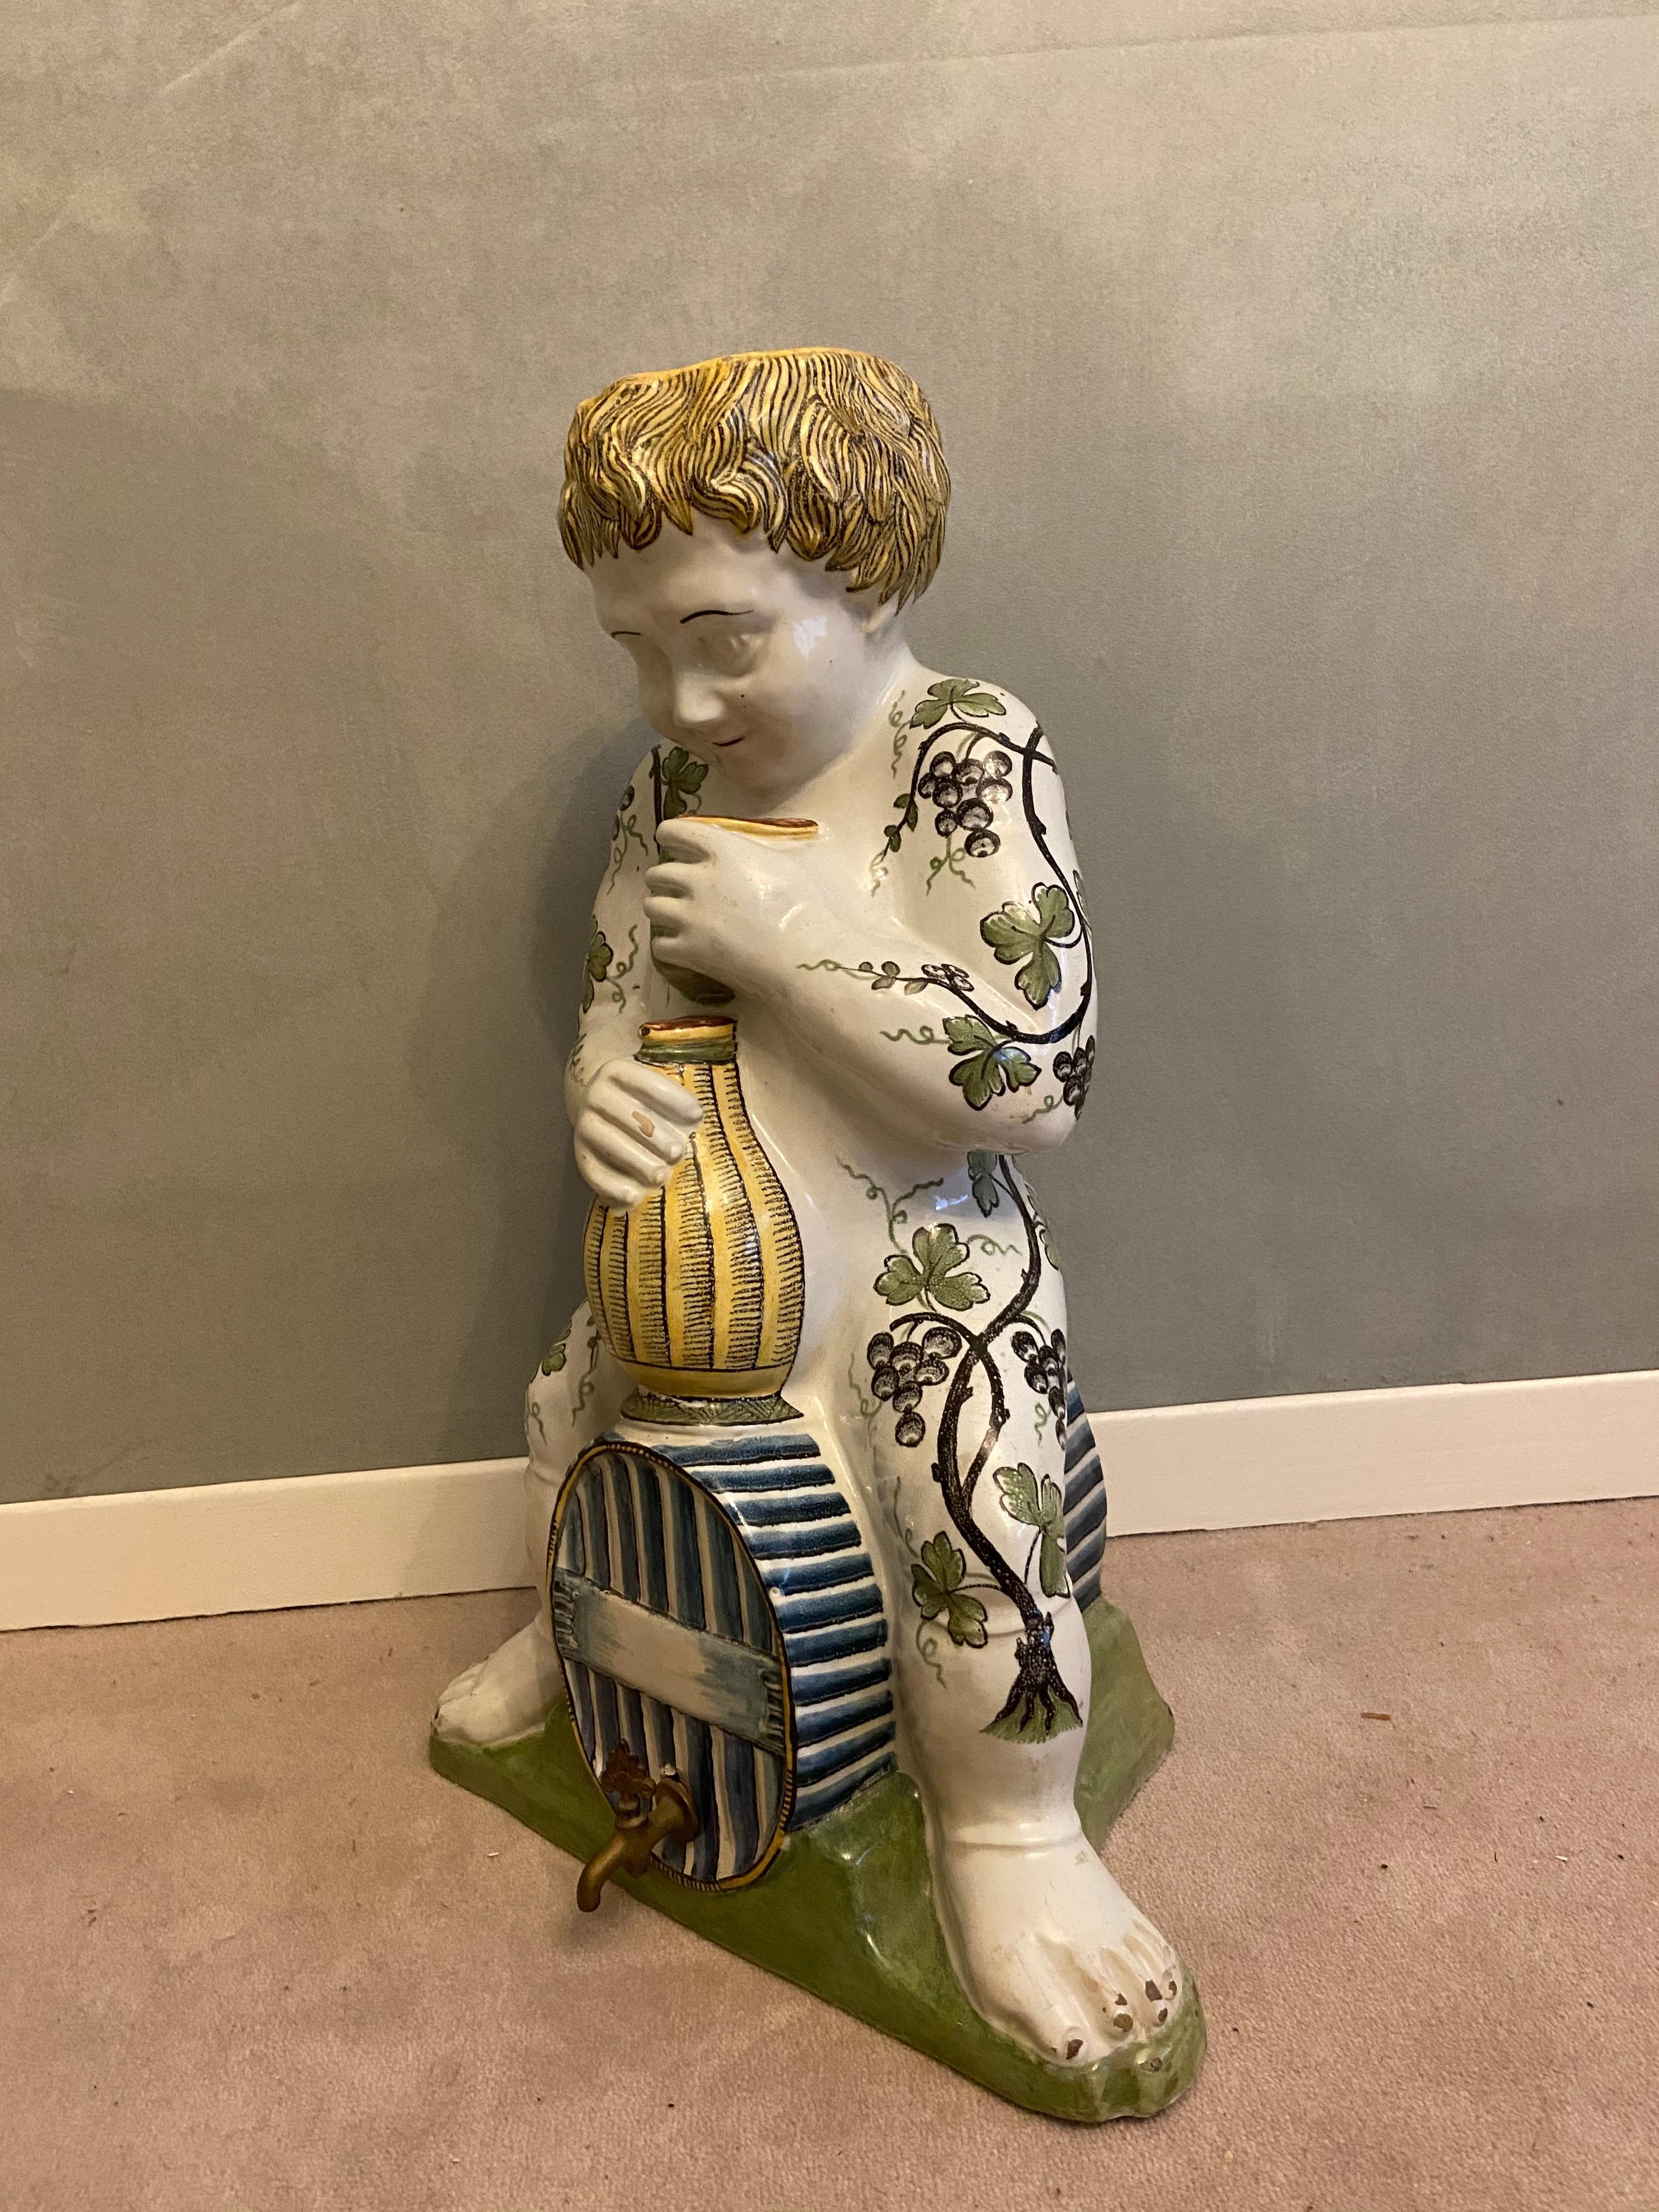 A Rouen Faience in the shape of a young bacchus seated on a blue barrel holding a bottle in his right hand and a glass in his left hand. Polychrome decoration of vine branches and grapes. Rouen Faience. French Work. Circa 18th Century.